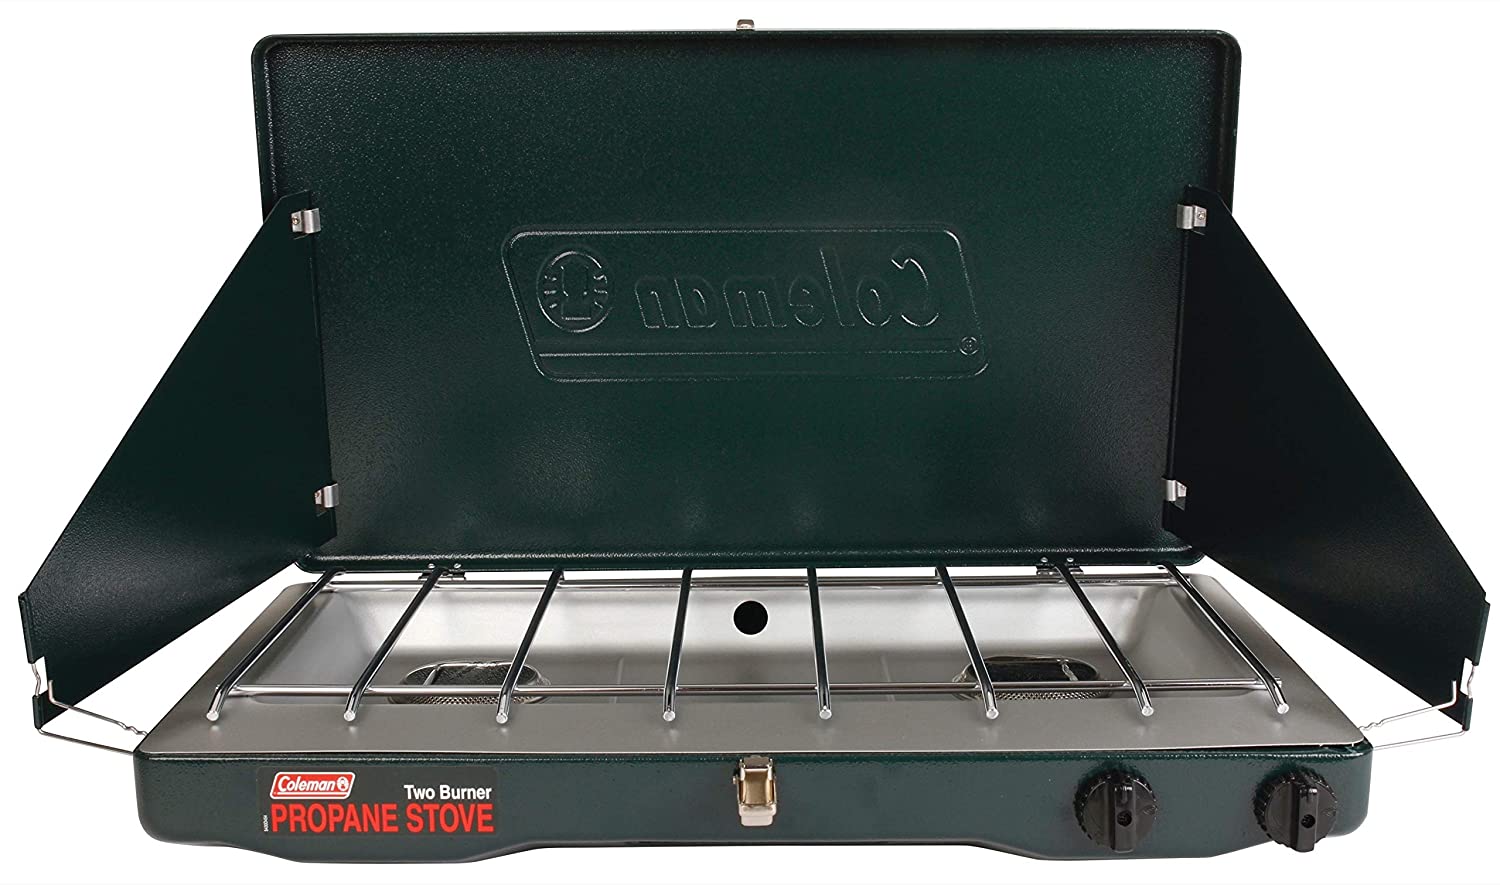 Detail Images Of Stove Nomer 34